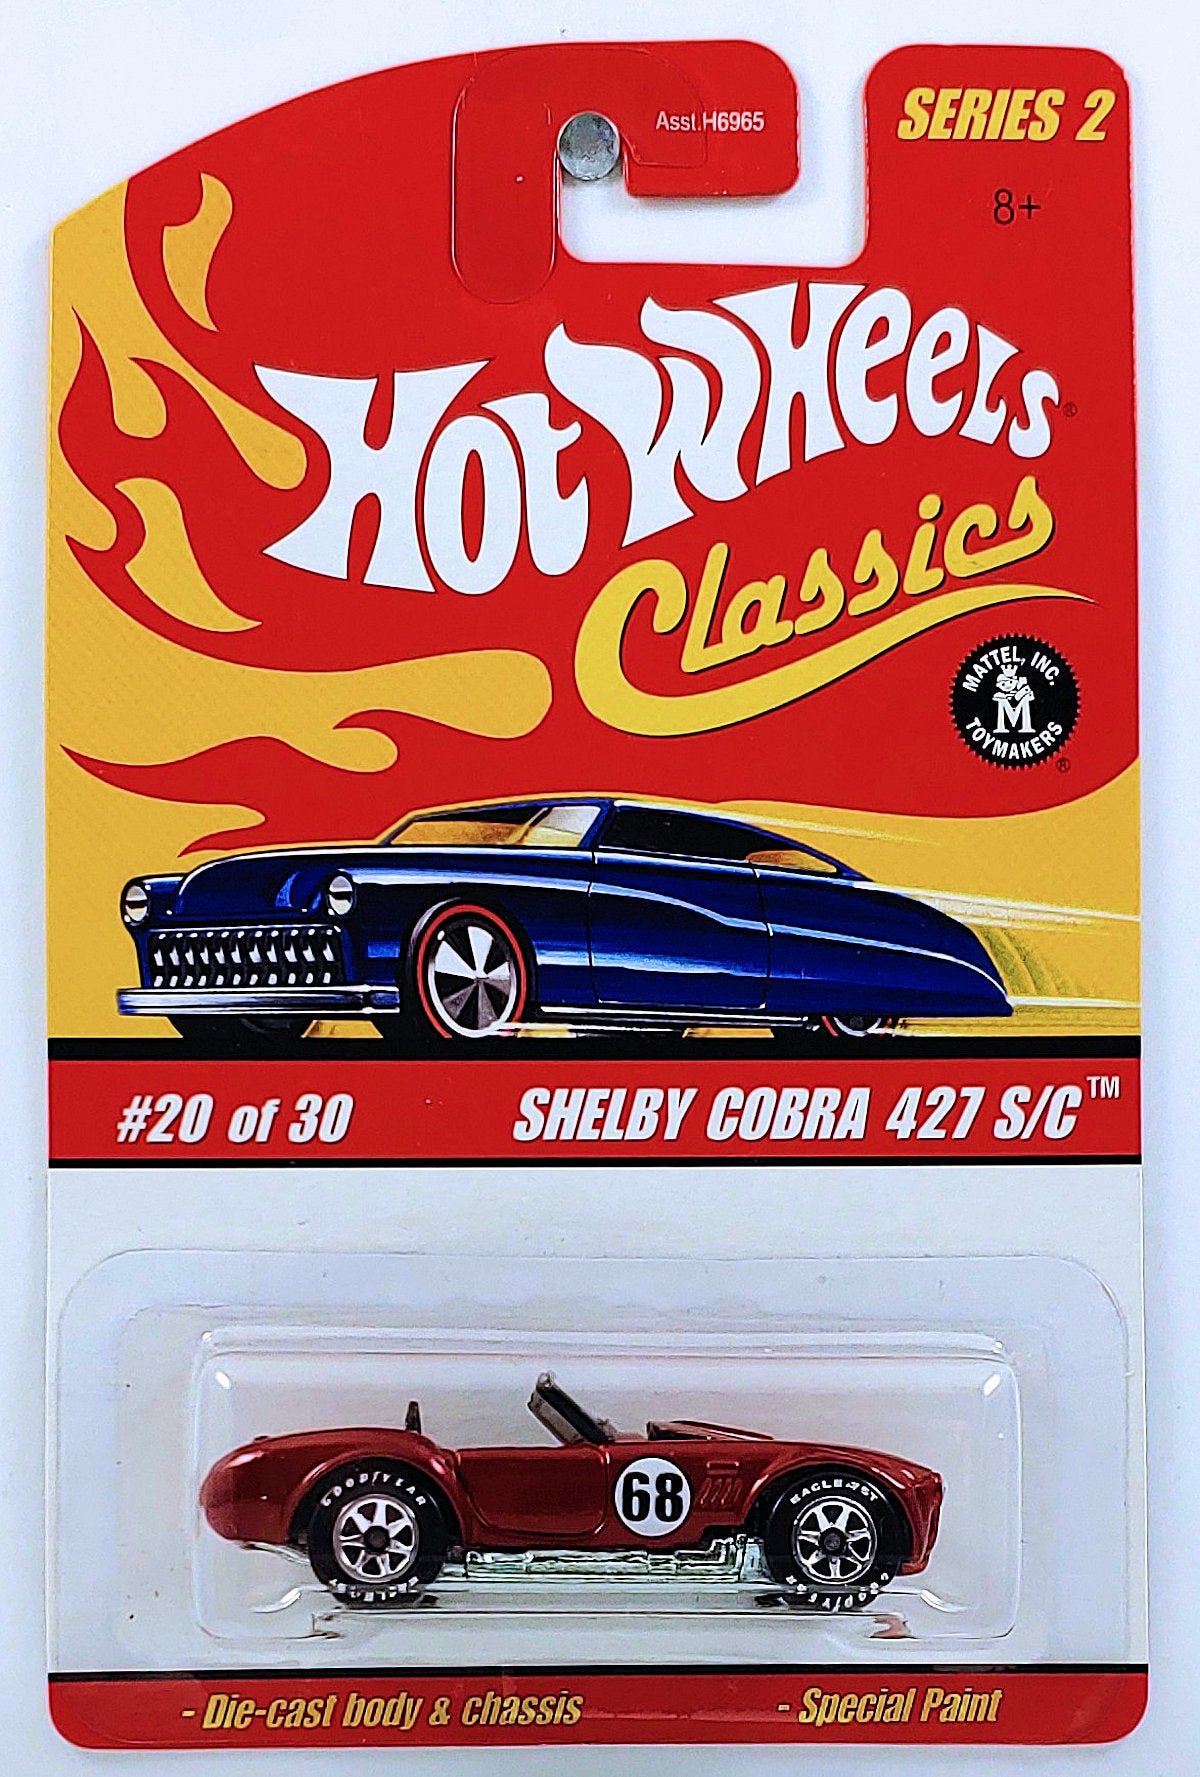 Hot Wheels 2006 - Classics Series 2 # 20/30 - Shelby Cobra 427 S/C - Spectraflame Red - '68' - 7 Spokes with Good Year - Metal/Metal